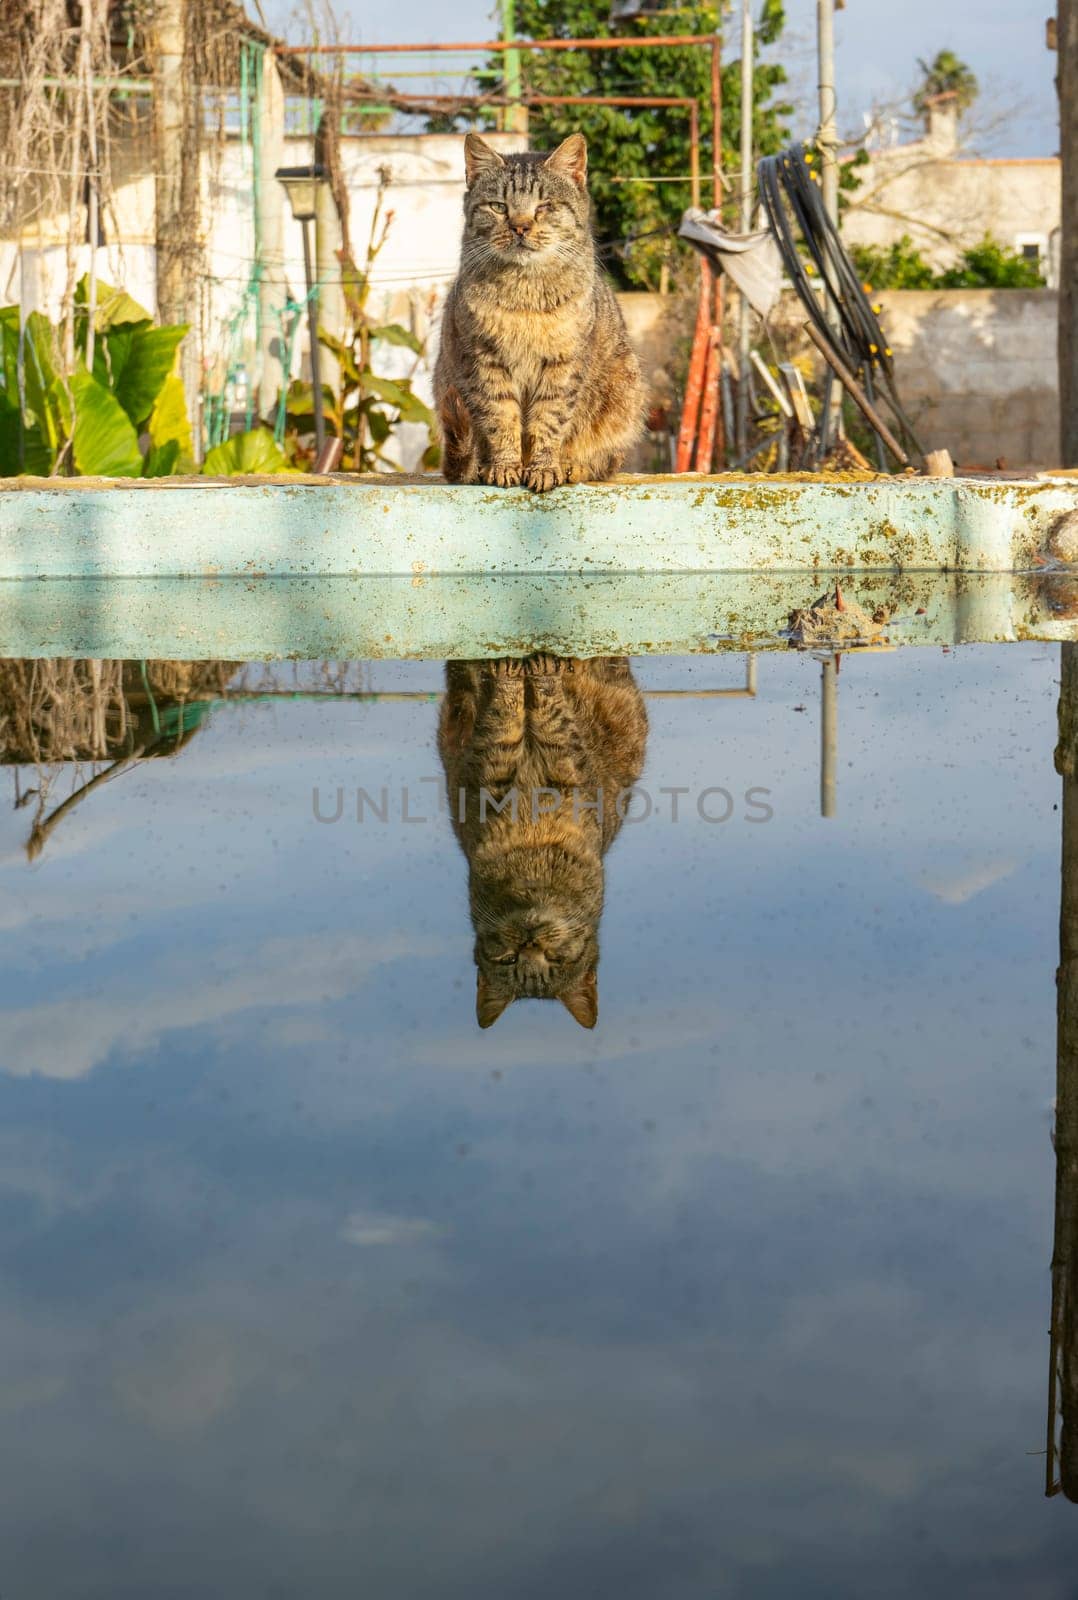 A contemplative cat sits atop a weathered beam, mirrored perfectly in the still water below. The backdrop of a rustic setting adds to the scene's serene charm, as the cat's eyes hold a watchful stillness